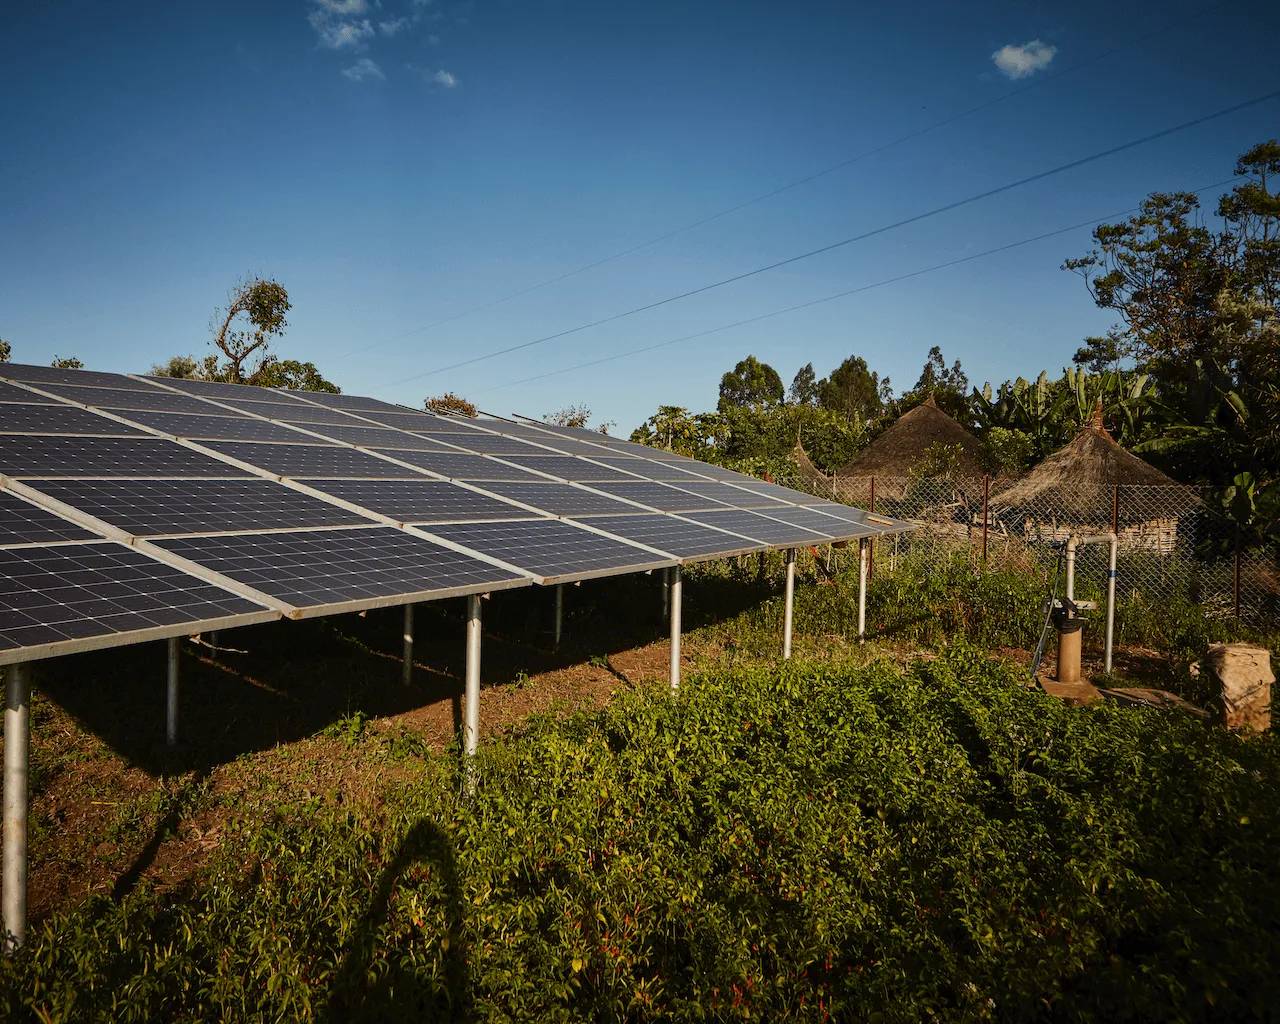 Solar electric panels in a rural area